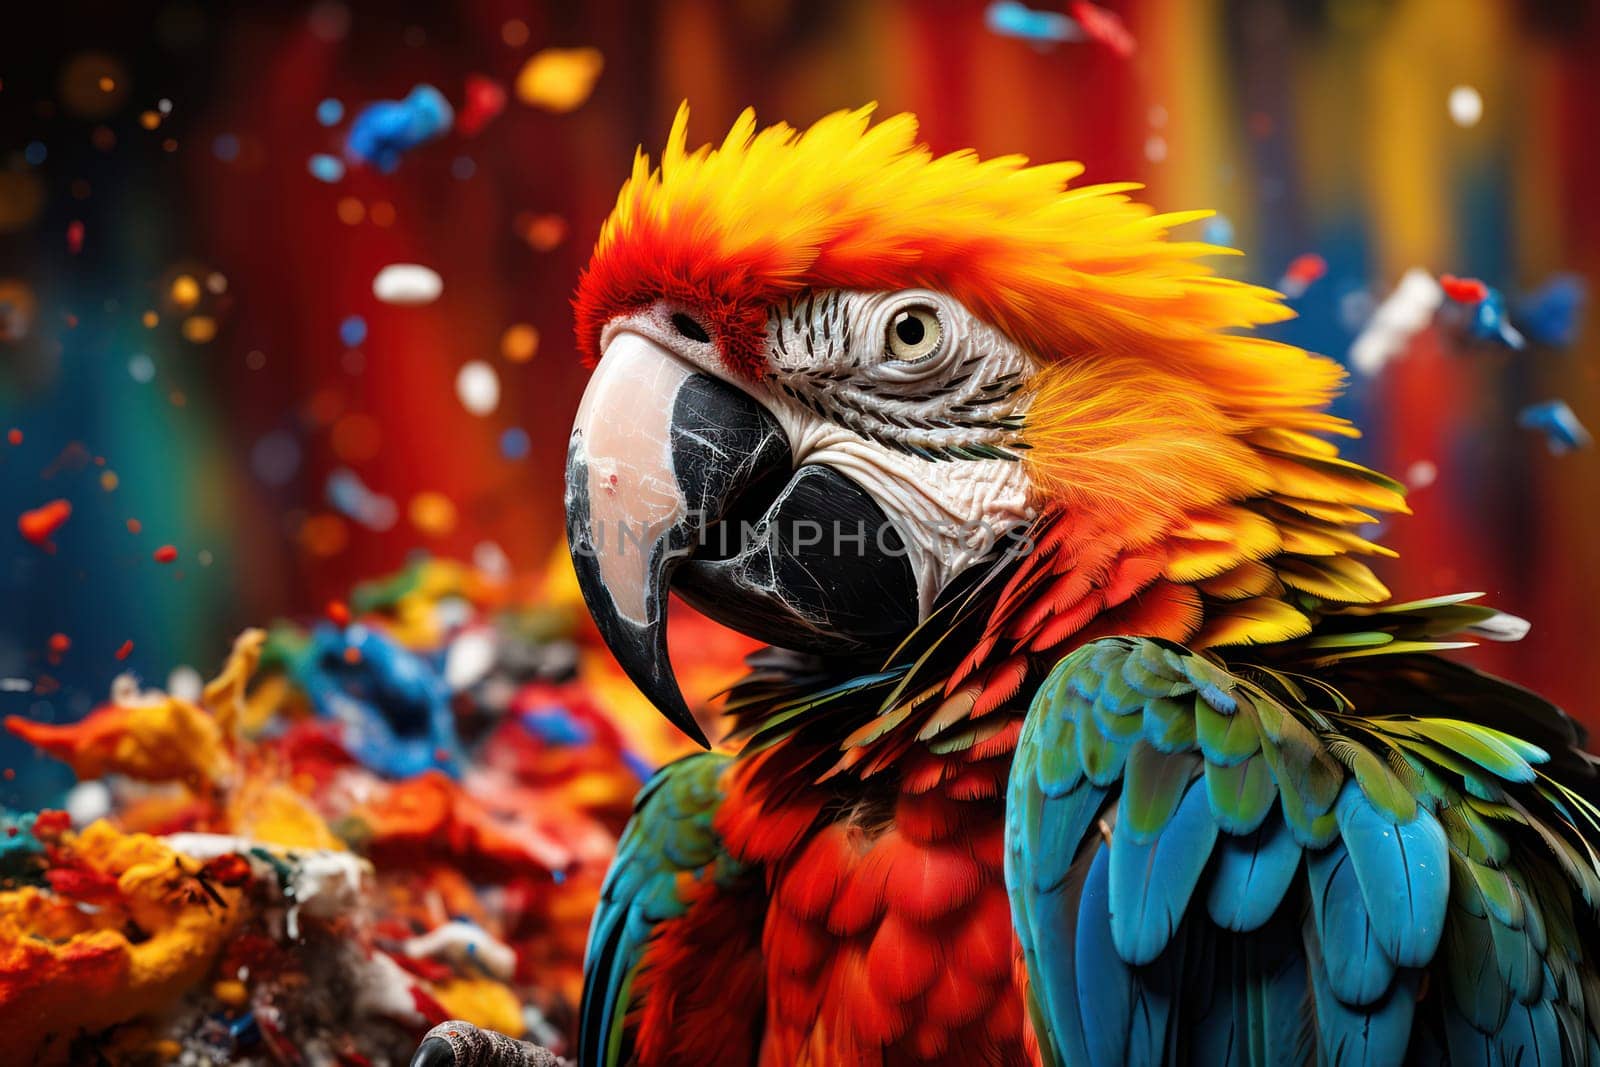 Vibrant Feathers: A Colorful Macaw Parrot with Vivid Plumage and Stunning Blue, Green, and Yellow Feathers - Portrait of a Beautiful Exotic Bird in the Tropical Rainforest by Vichizh